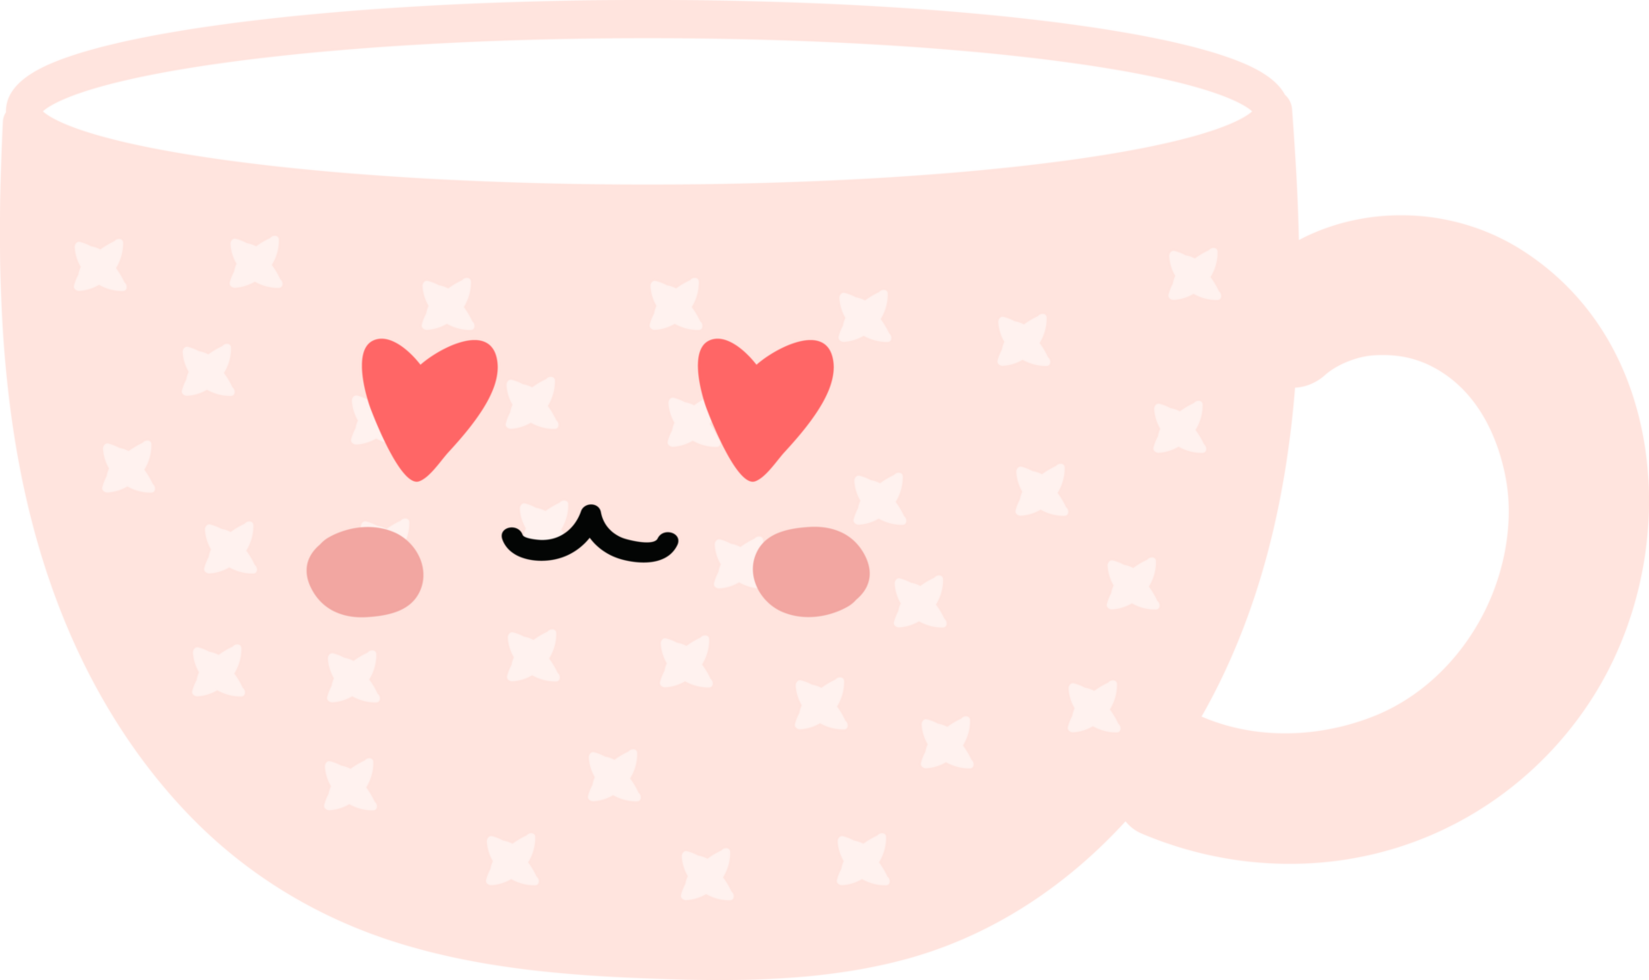 teacup cartoon character crop-out png